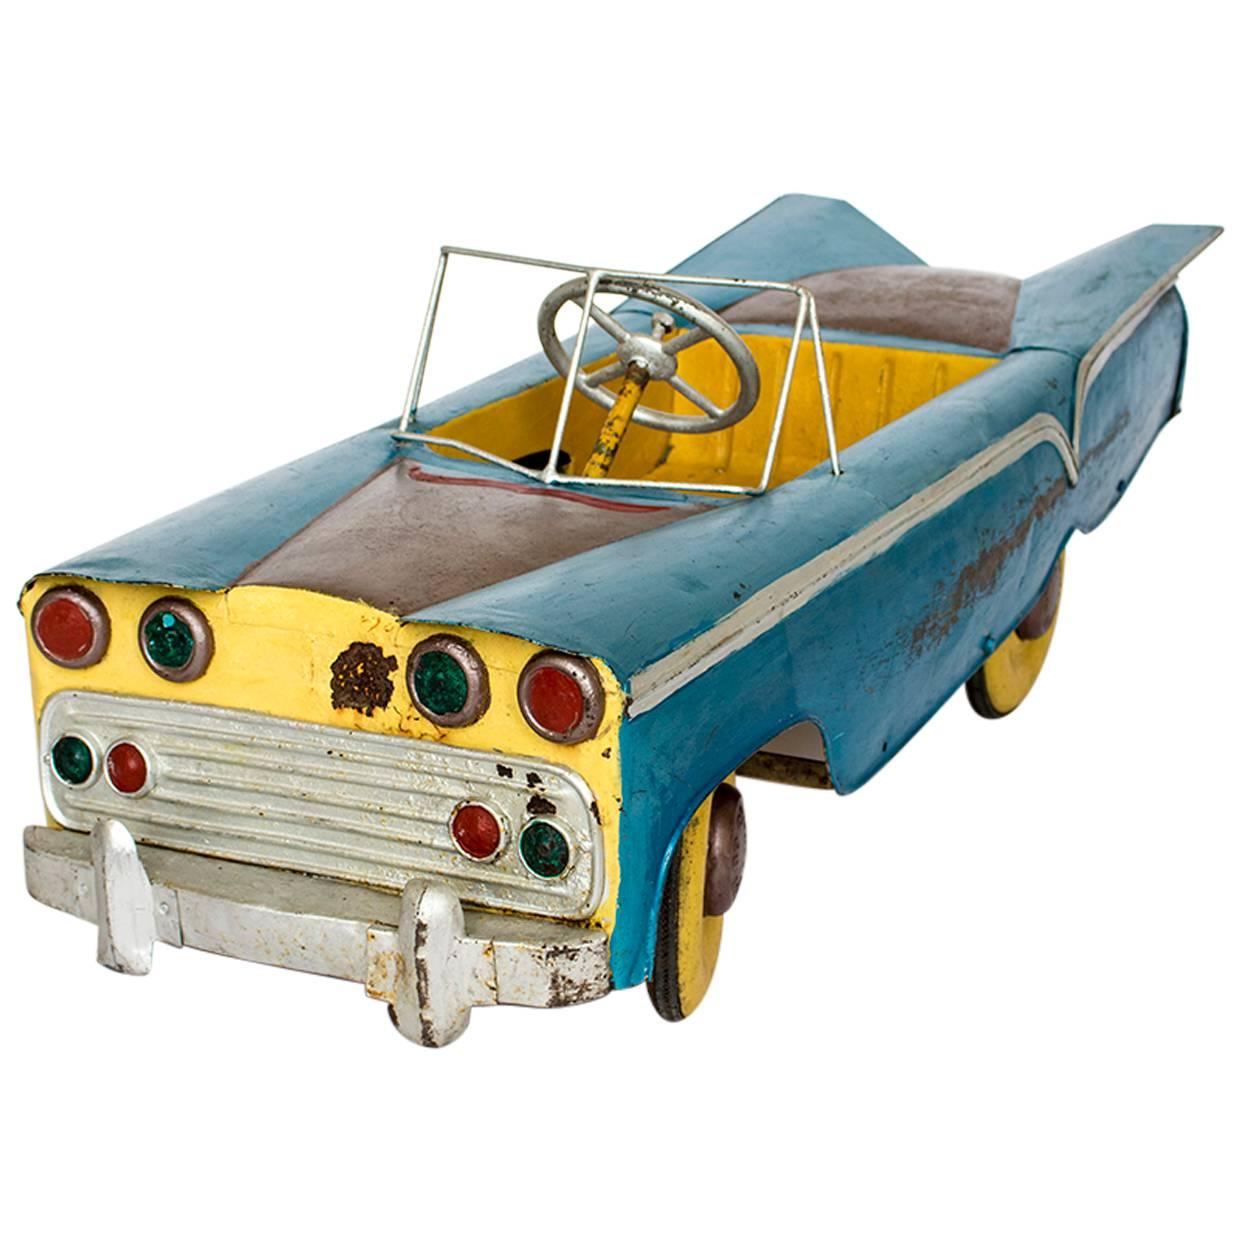 Unusual Burmese Painted Model Pedal Car, circa 1950s -1960s Childs Toy For Sale